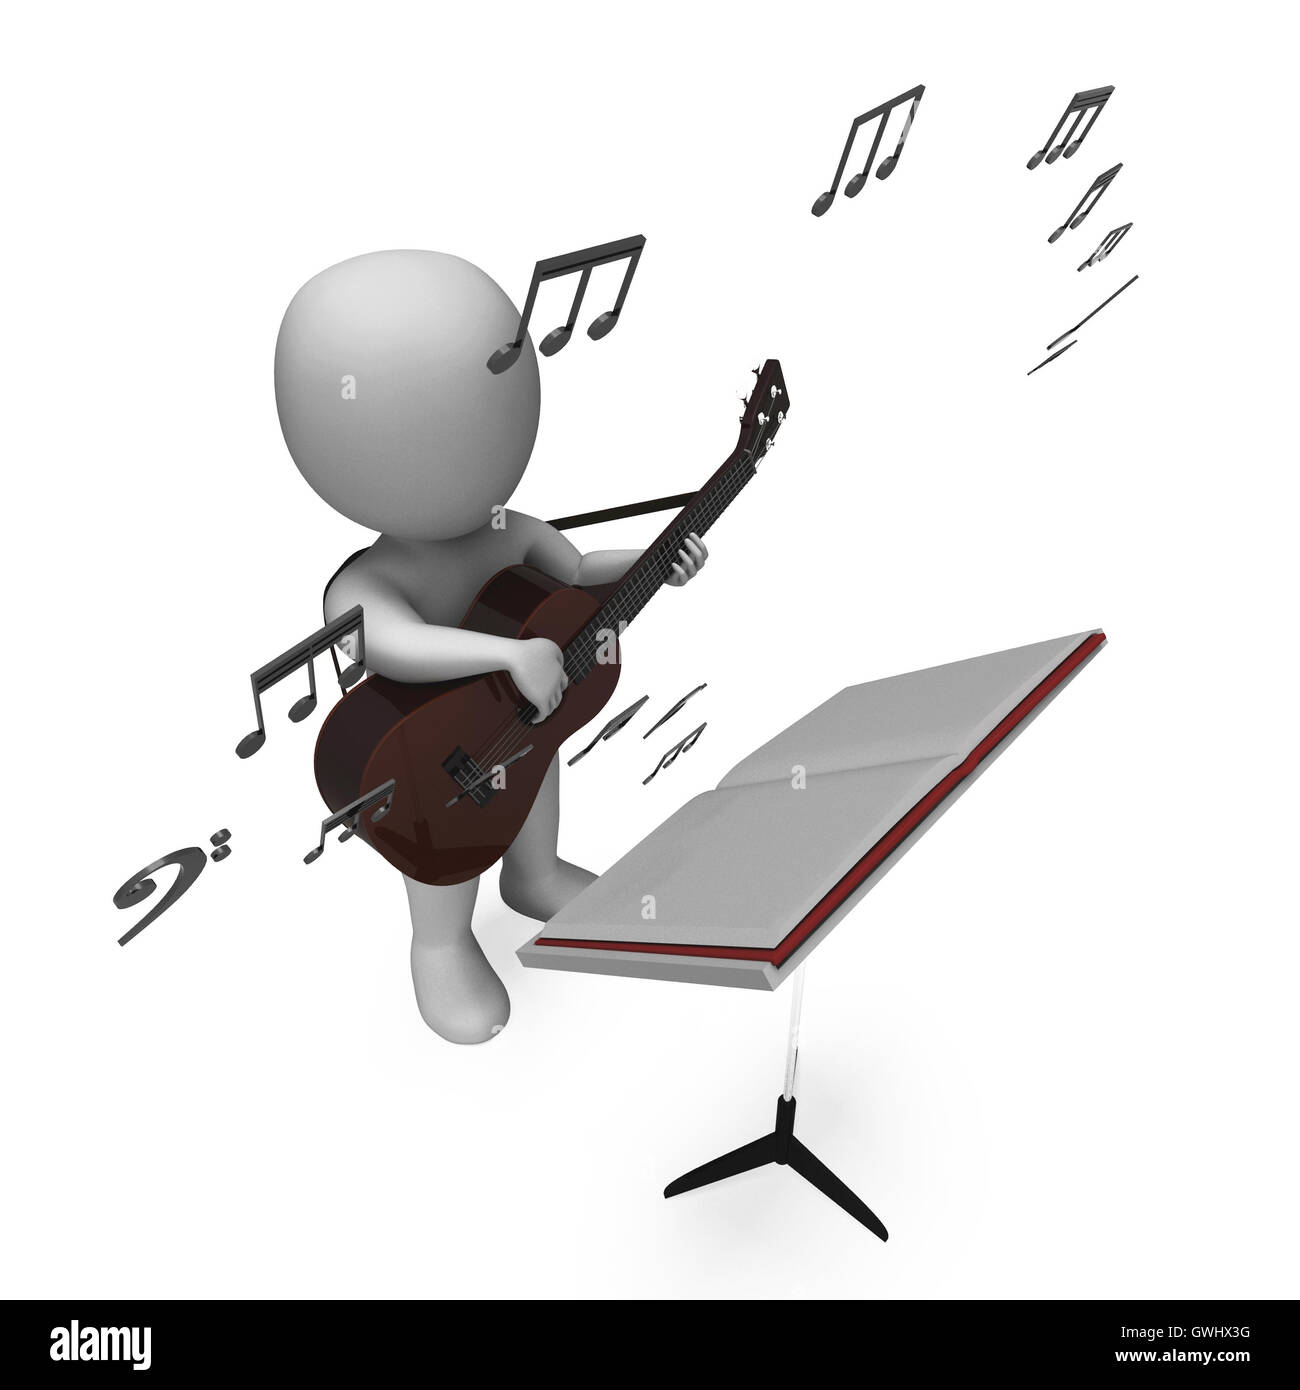 Musician Guitarist Character Shows Guitar Music And Performing Stock Photo